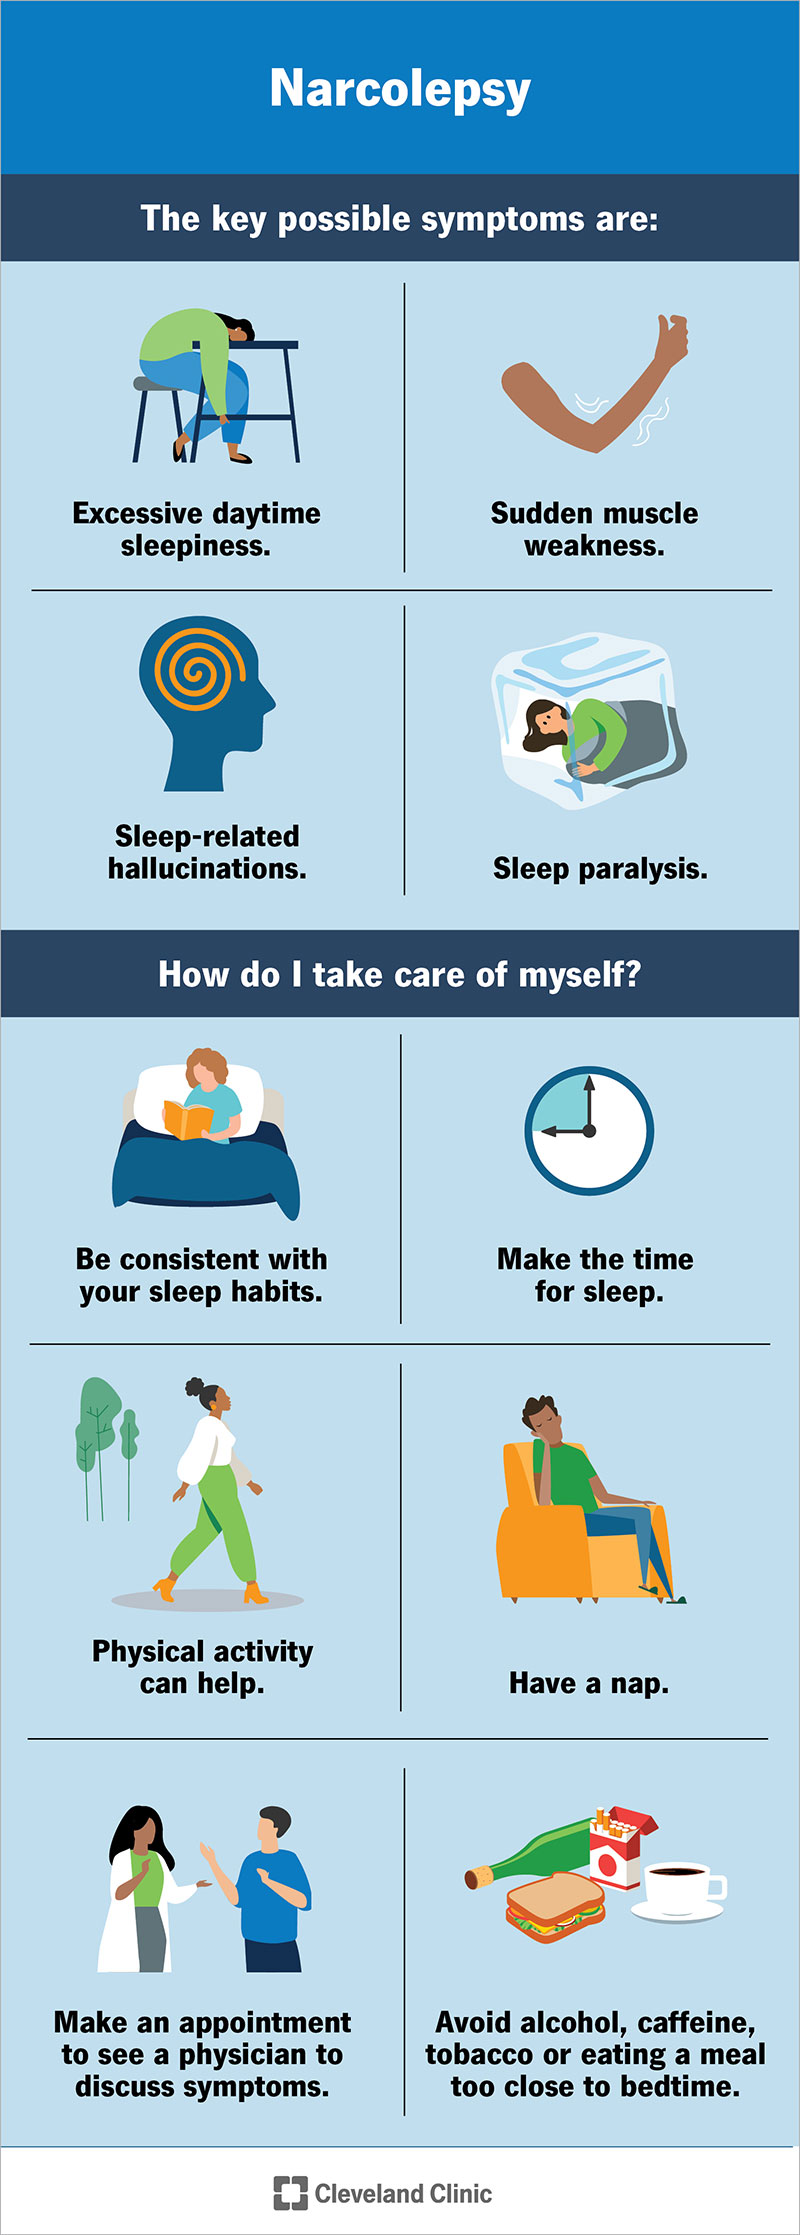 Narcolepsy has four key symptoms. Focusing on sleep hygiene greatly help improve sleep and this condition’s effects.